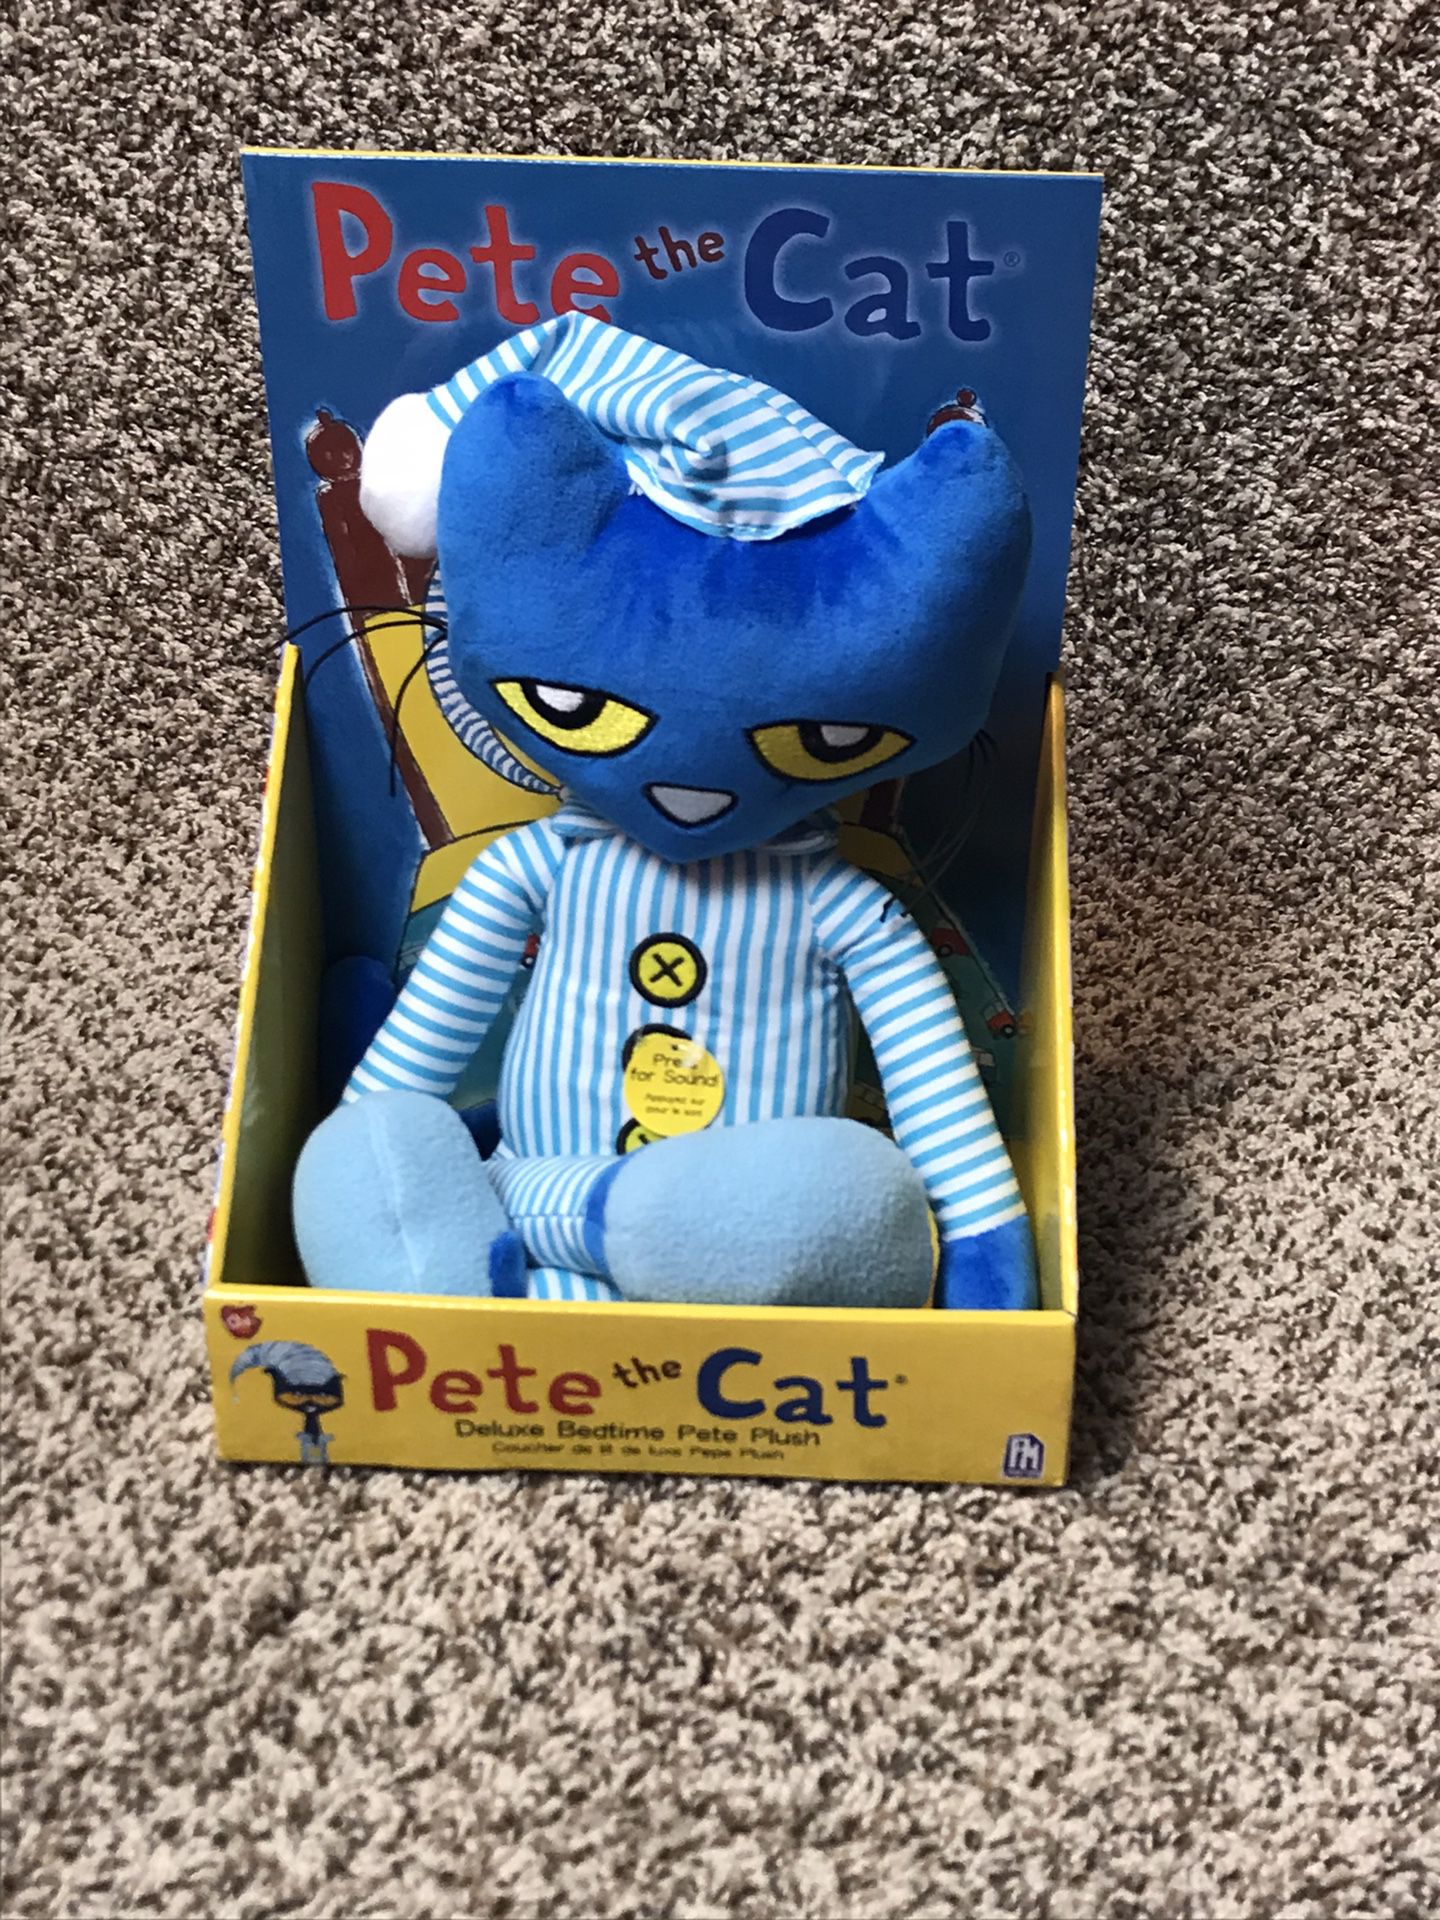 Pete The Cat Deluxe Bedtime Pete Plush 15" Doll Plays Music - NEW